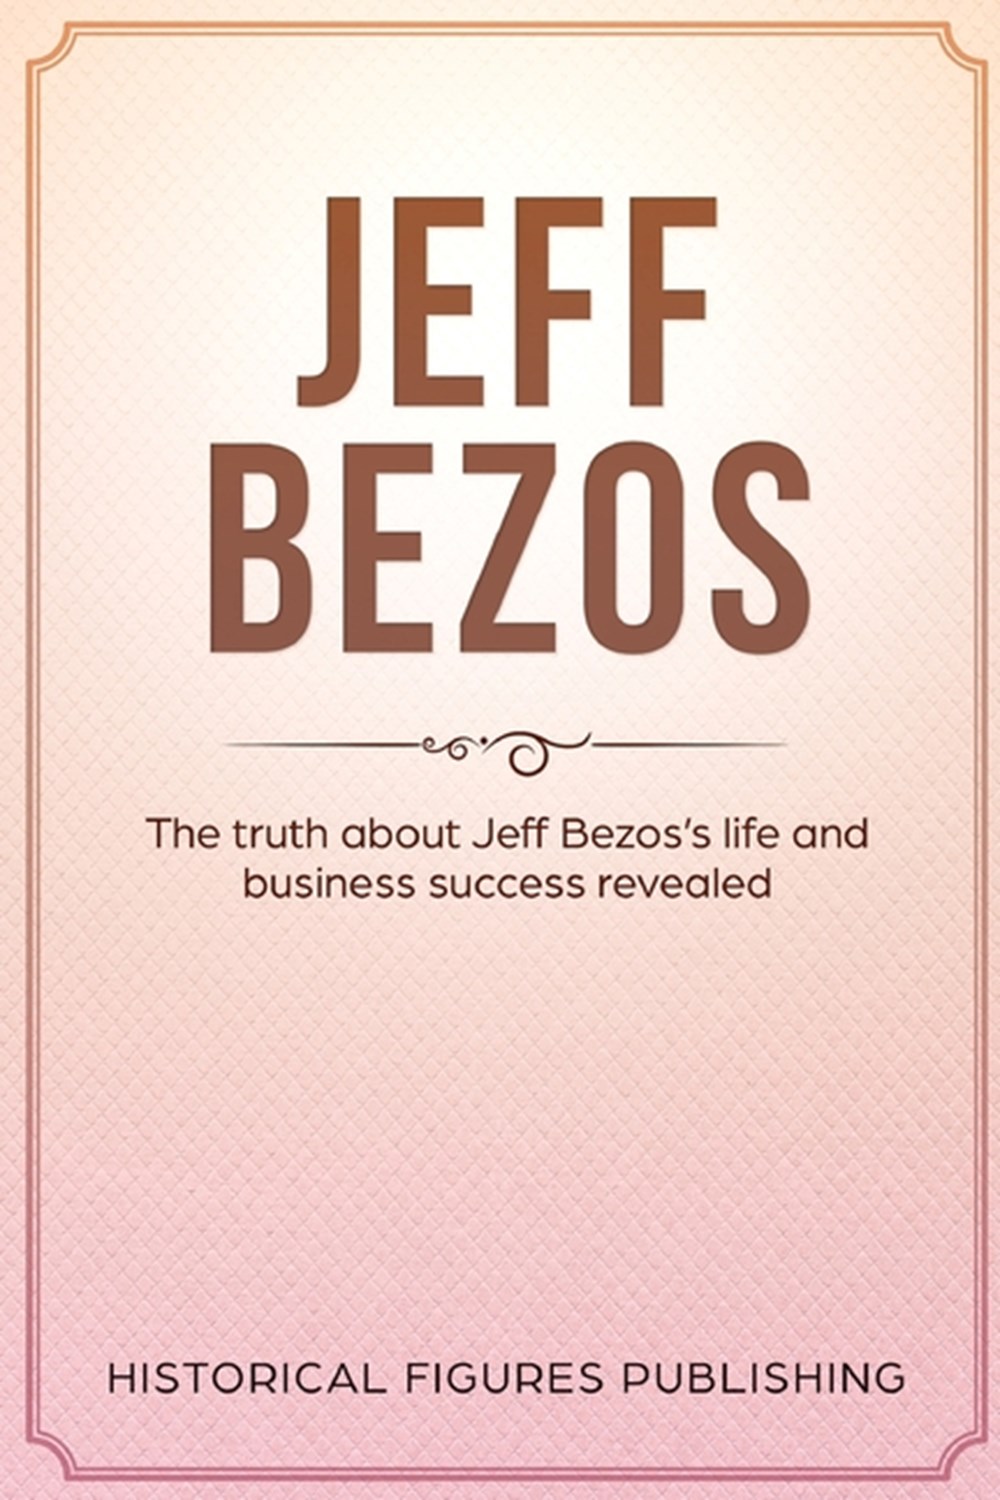 Jeff Bezos: The Truth about Jeff Bezos's Life and Business Success Revealed